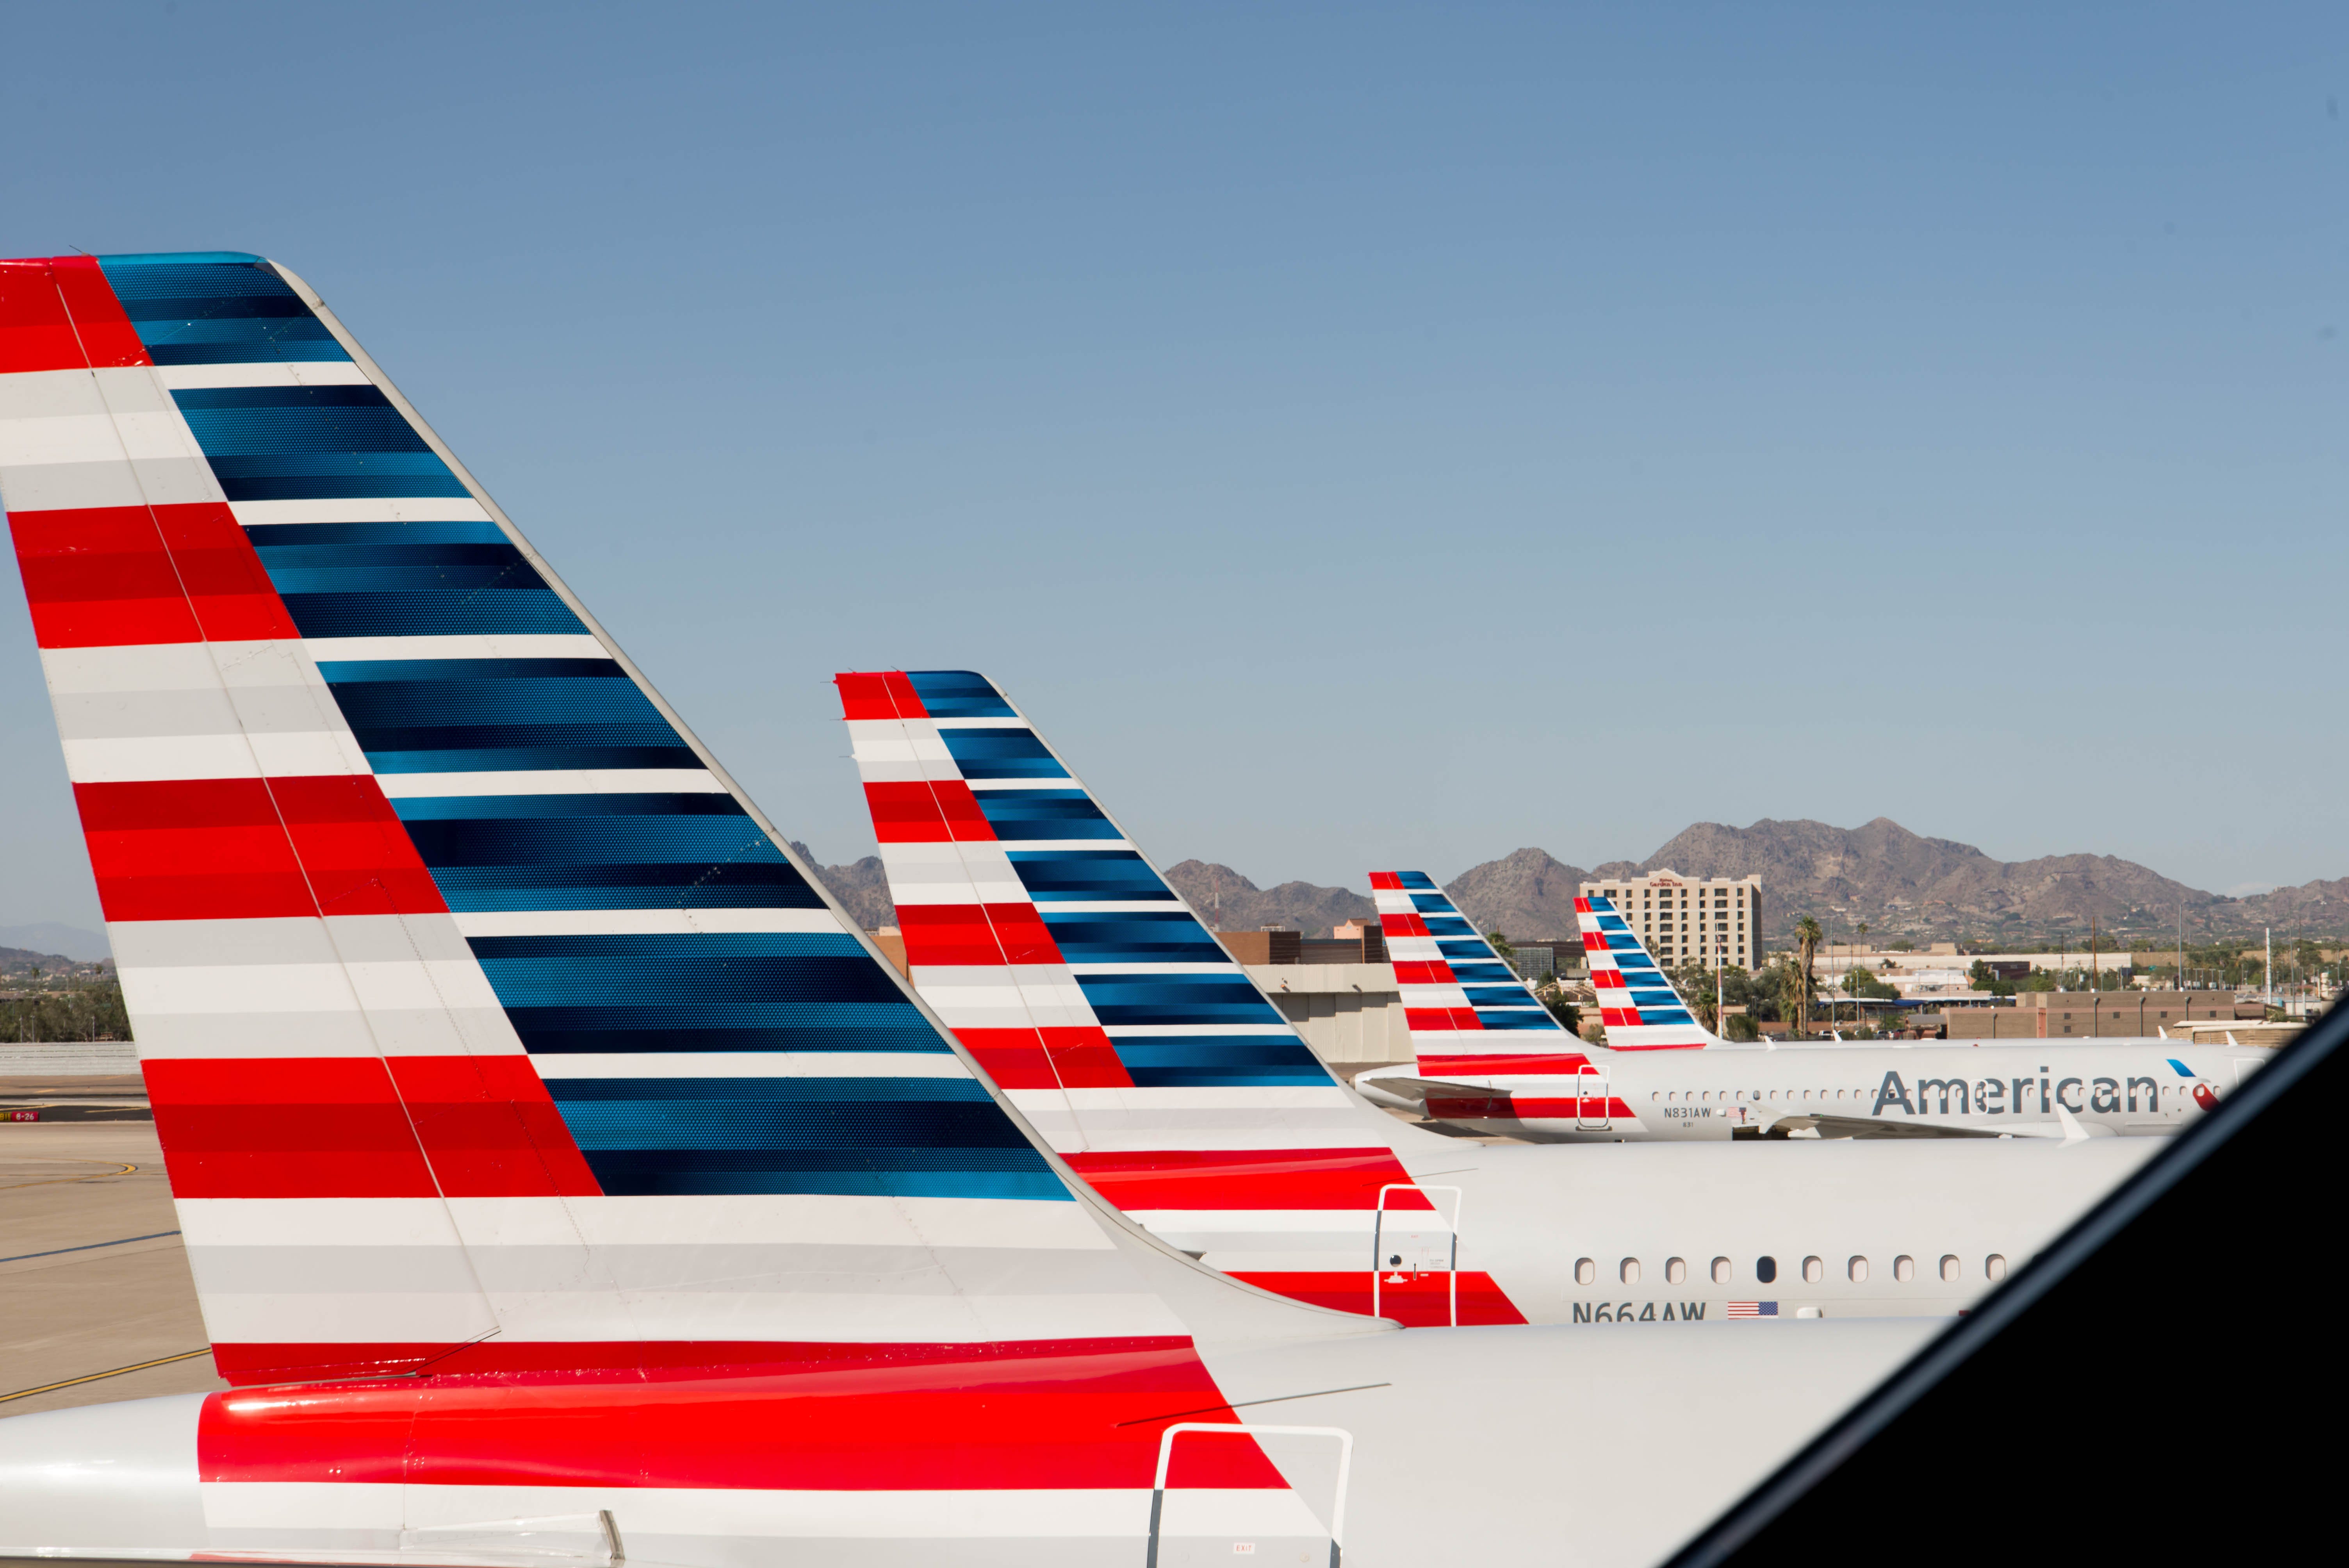 American Airlines, Delta Airlines Drop, But Which Travel Stock Held Trend?